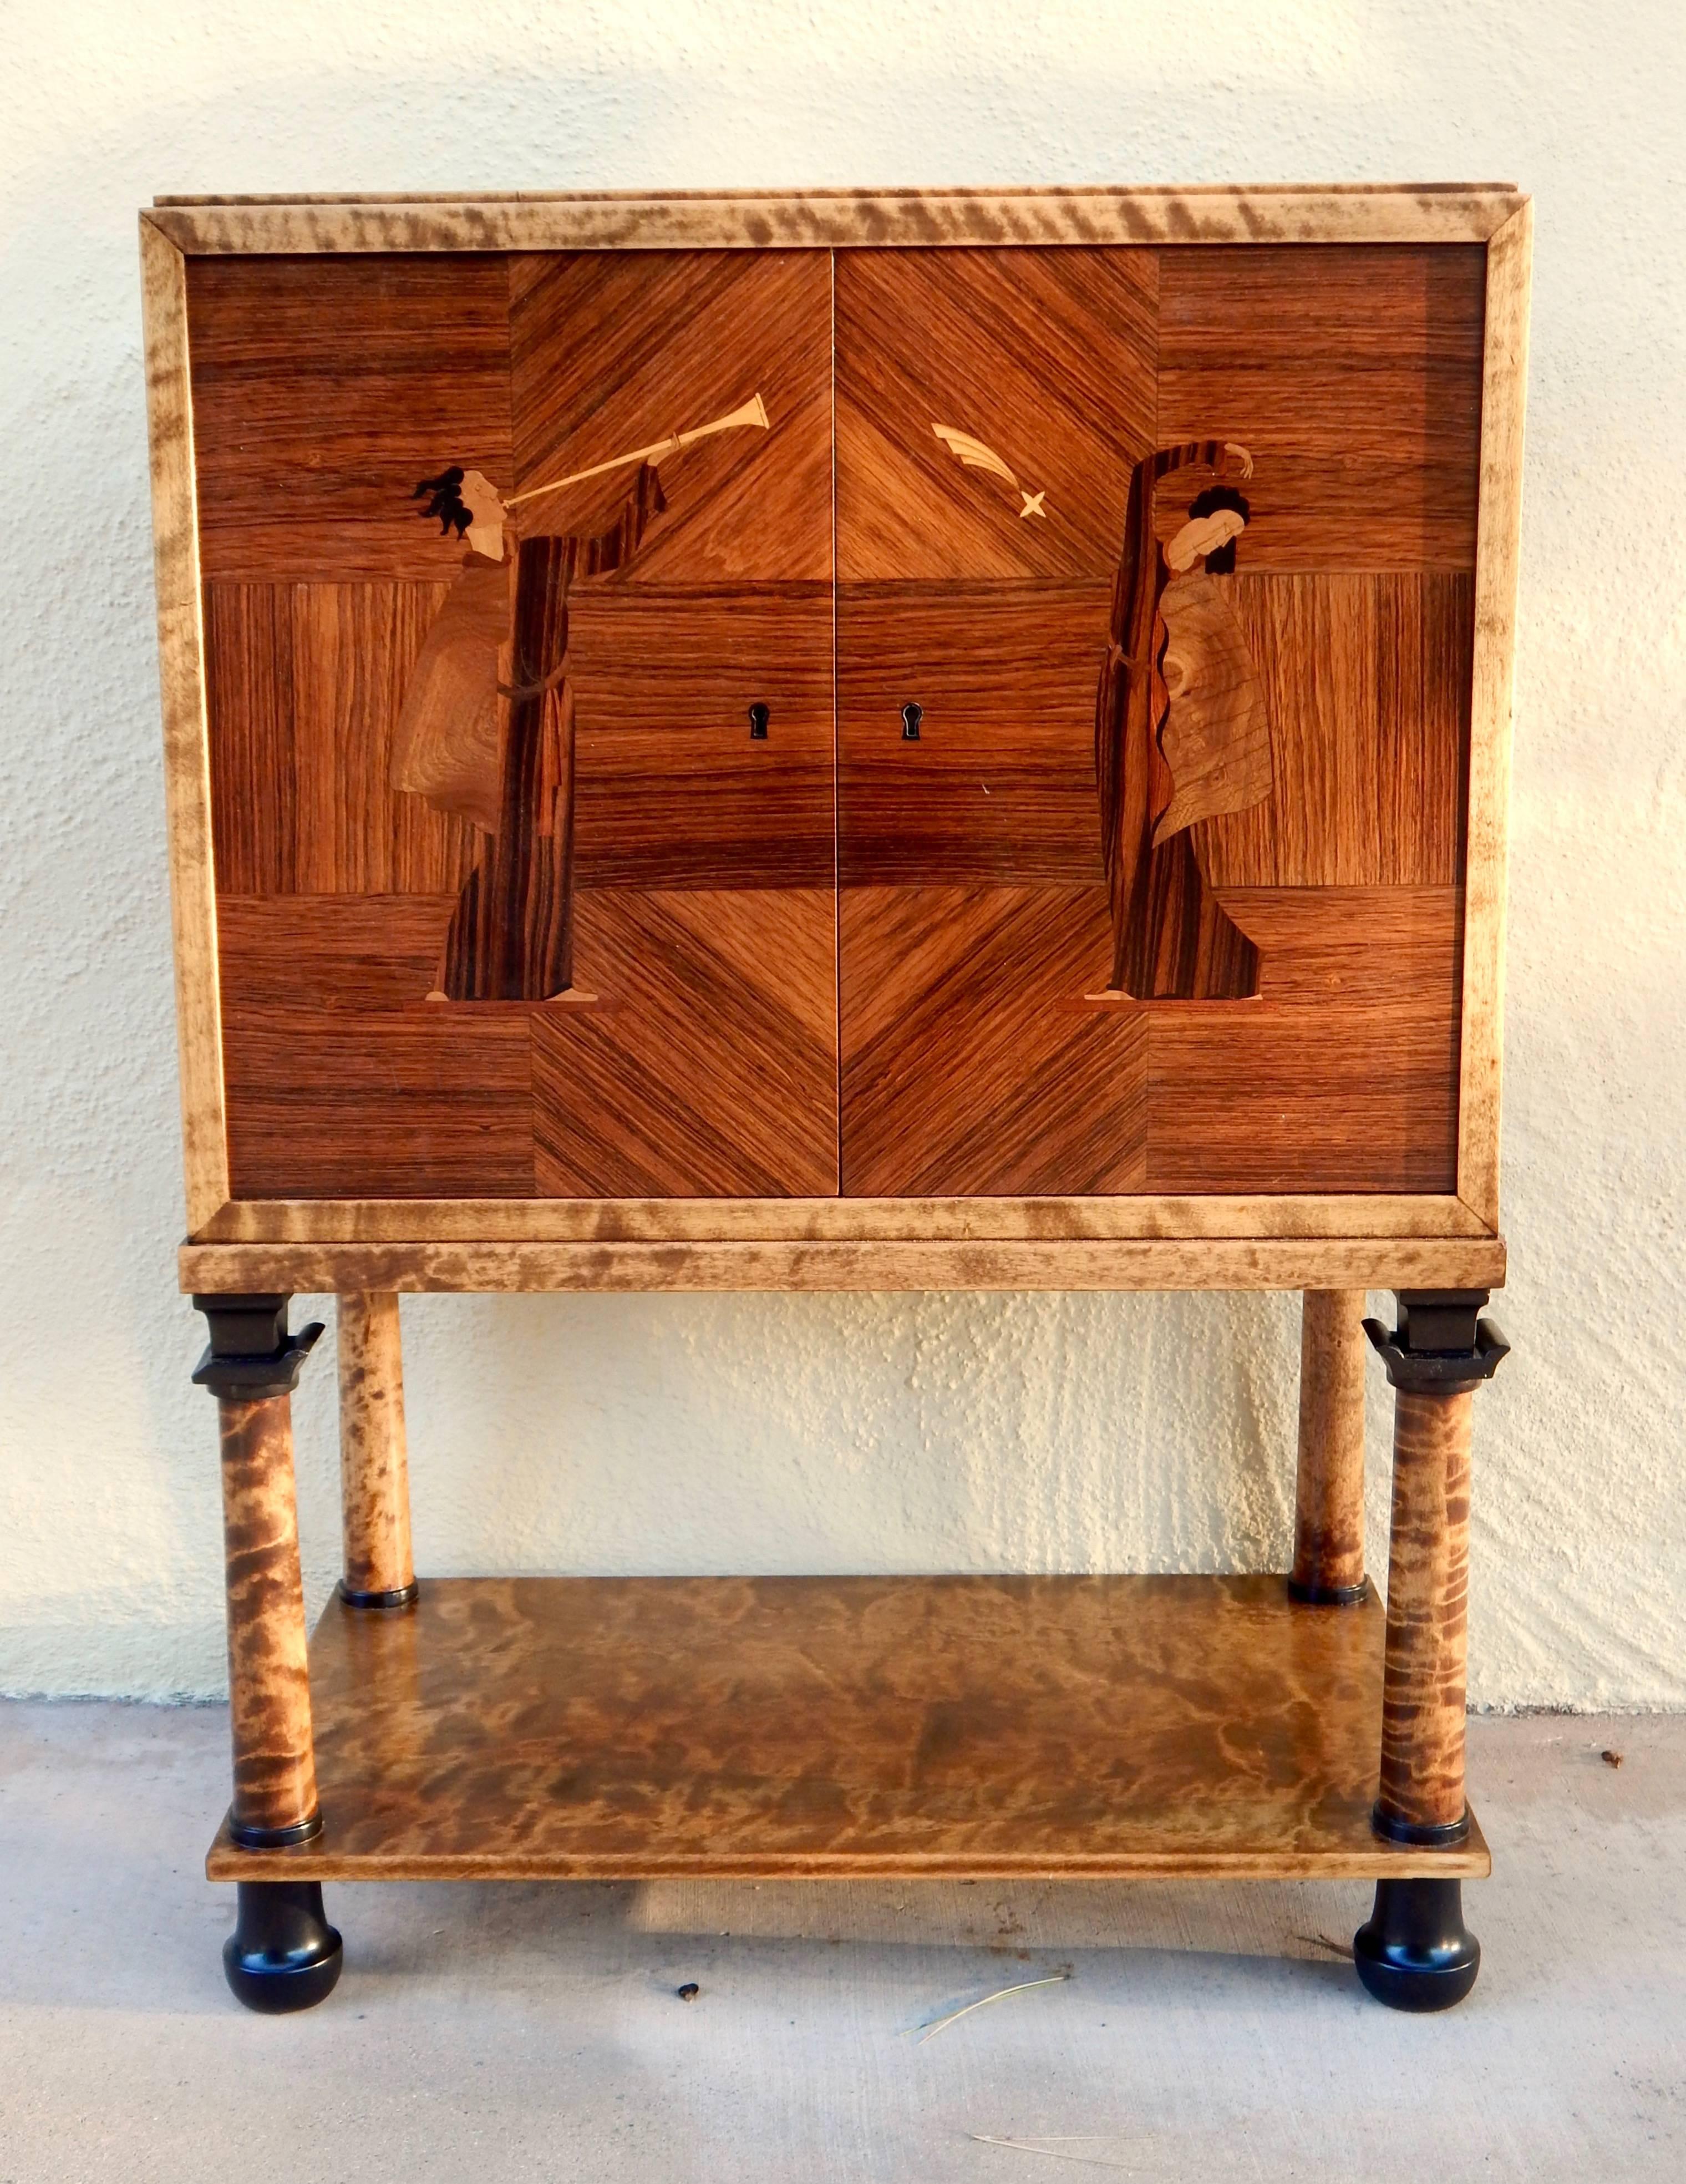 Swedish Art Deco inlaid bar cabinet by Mjölby Intarsia, Mjölby, Sweden, circa 1930. Rendered in golden flame birchwood with ebonized detailing on leg tip and column. Inlaid doors in rosewood, Carpathian elm, ebony and Karelian birch. This cabinet is